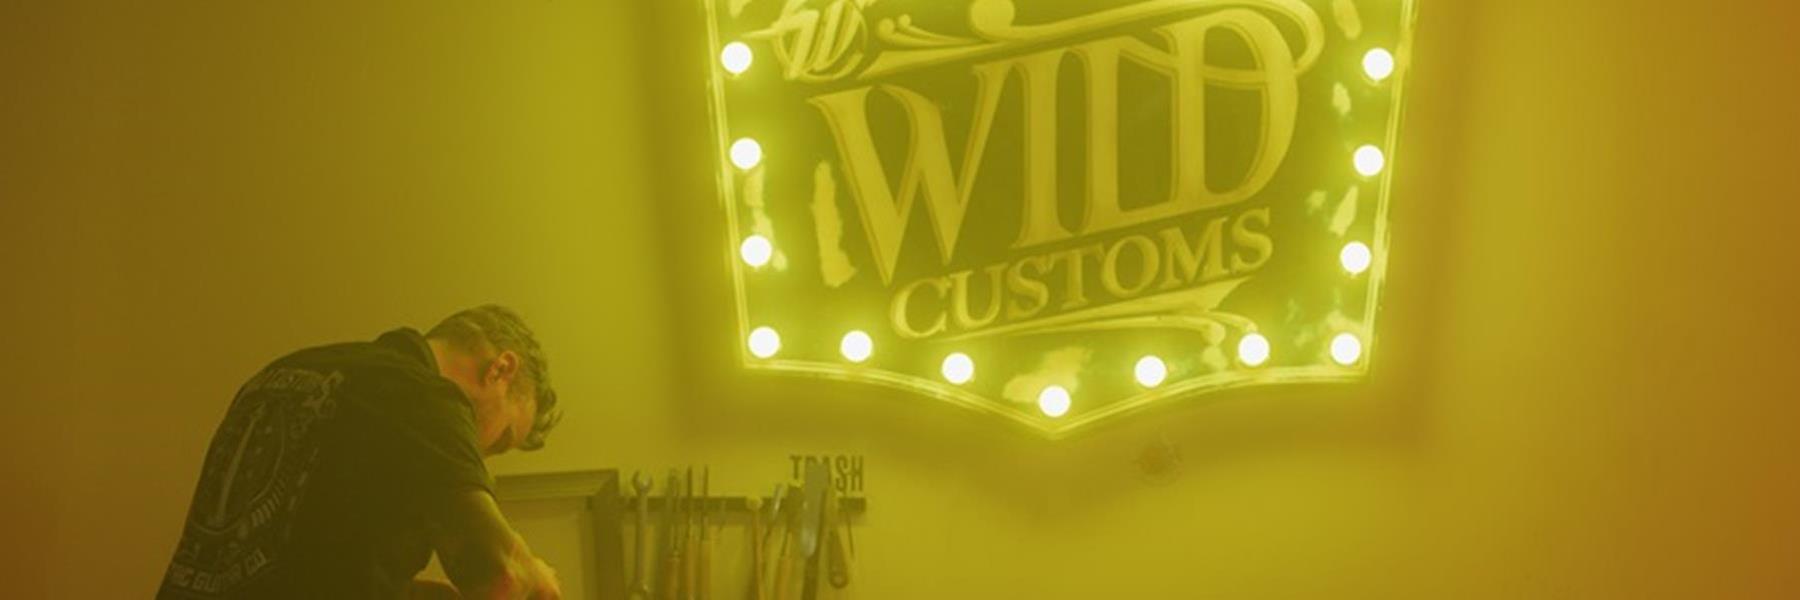 Wild Custom Guitars: French excellence in the wild